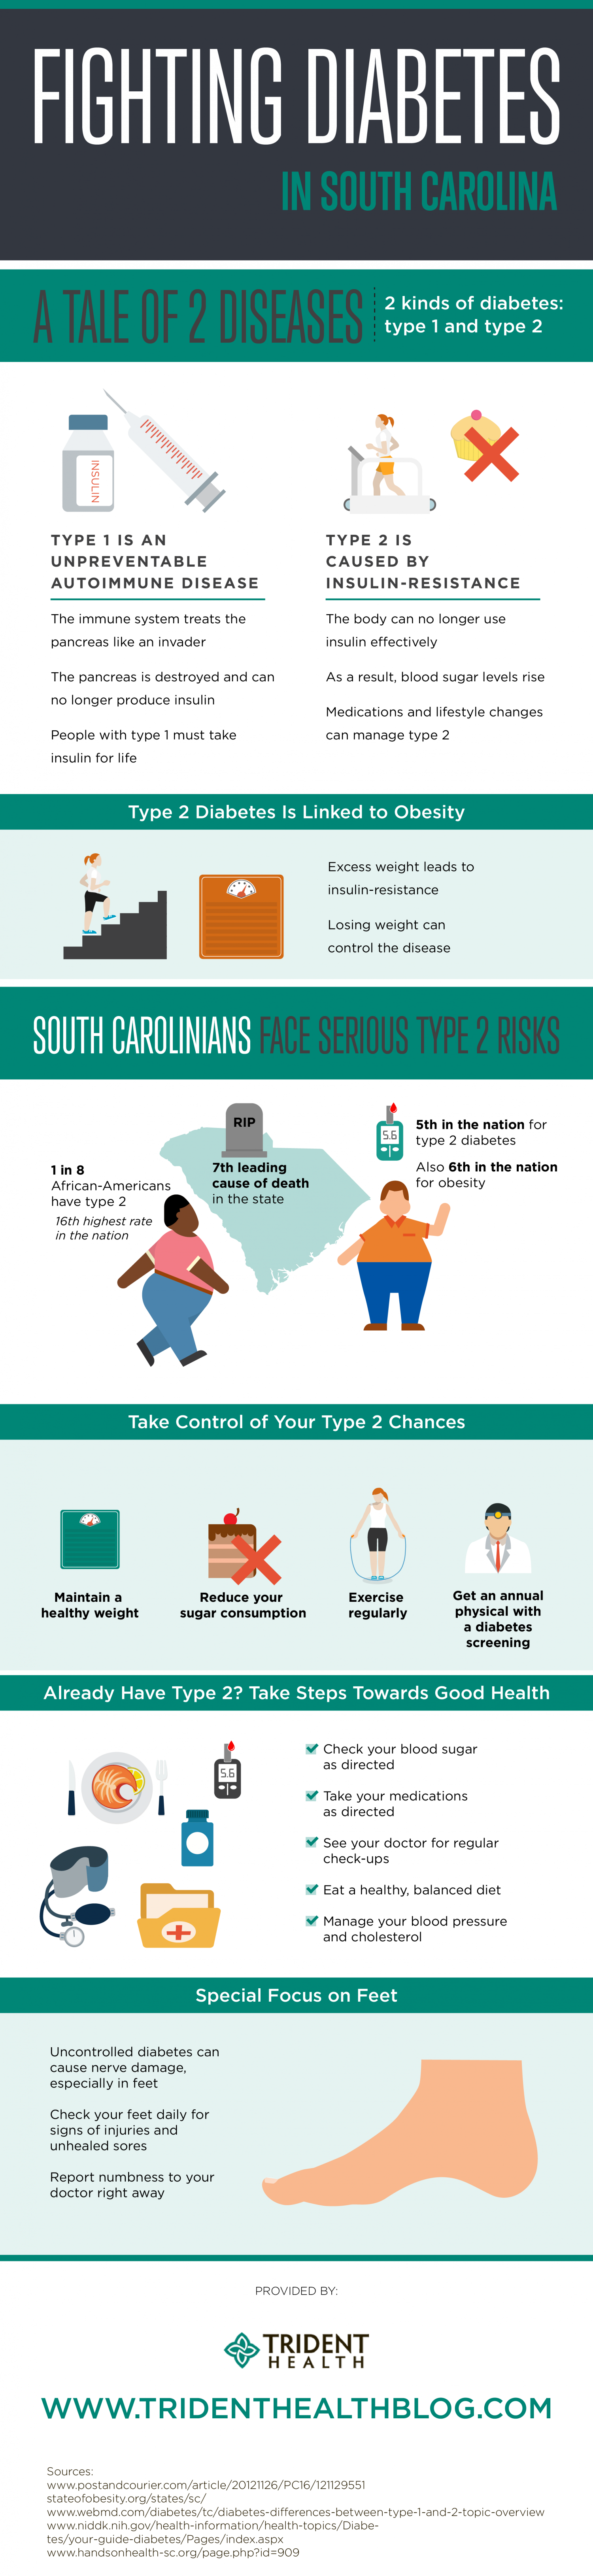 Fighting Diabetes in South Carolina Infographic